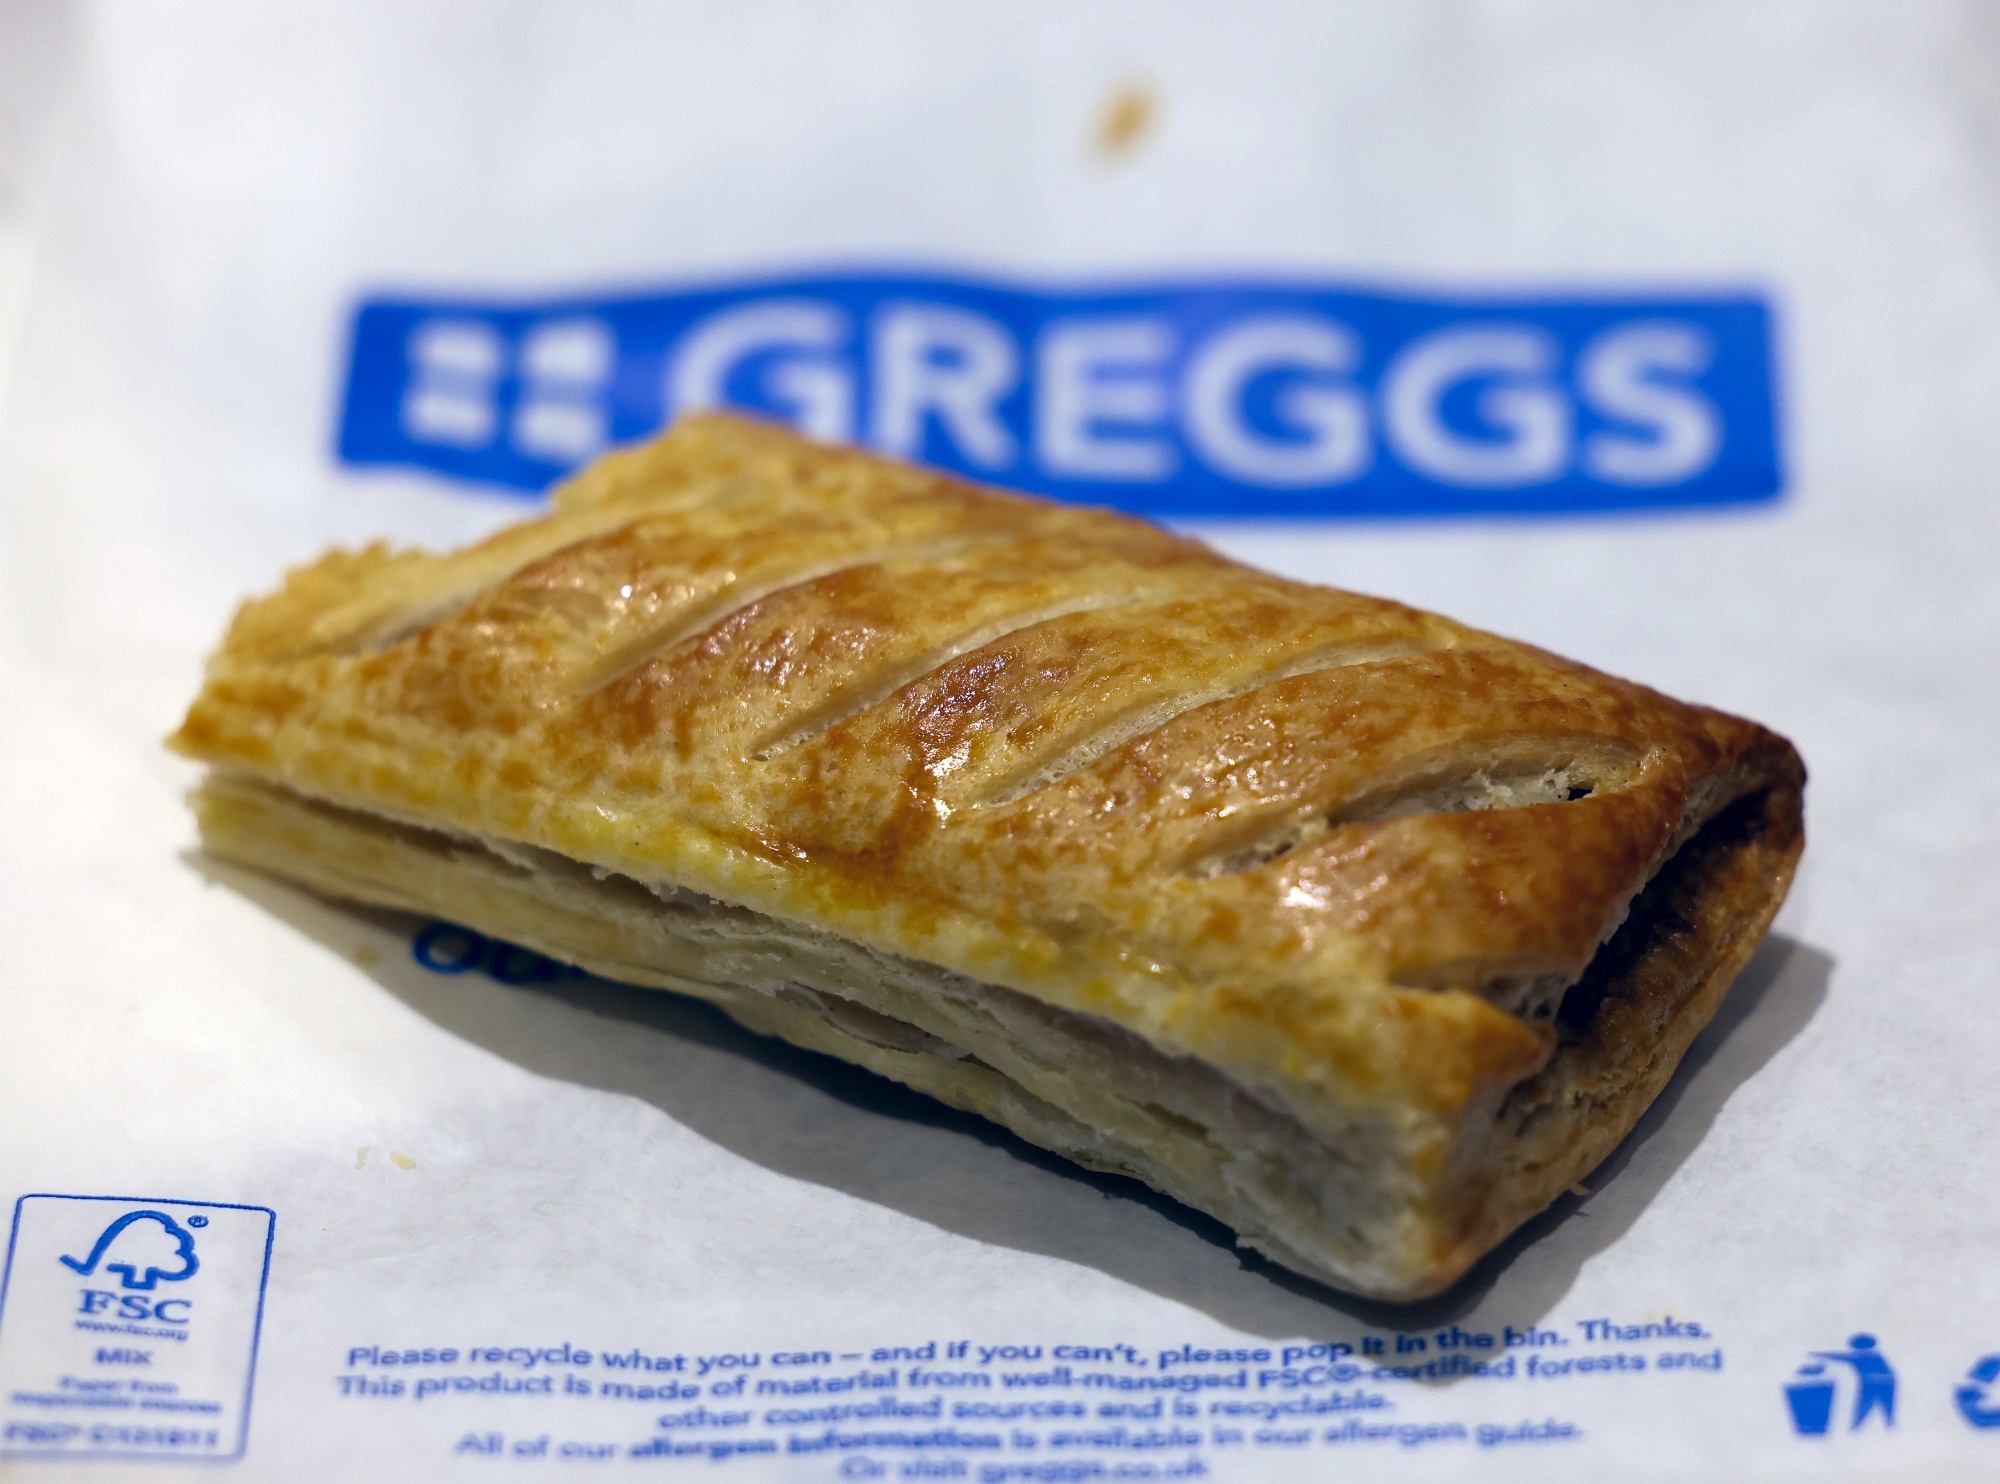 Sausage Roll Maker Greggs Sees Easing Cost Inflation - Bloomberg